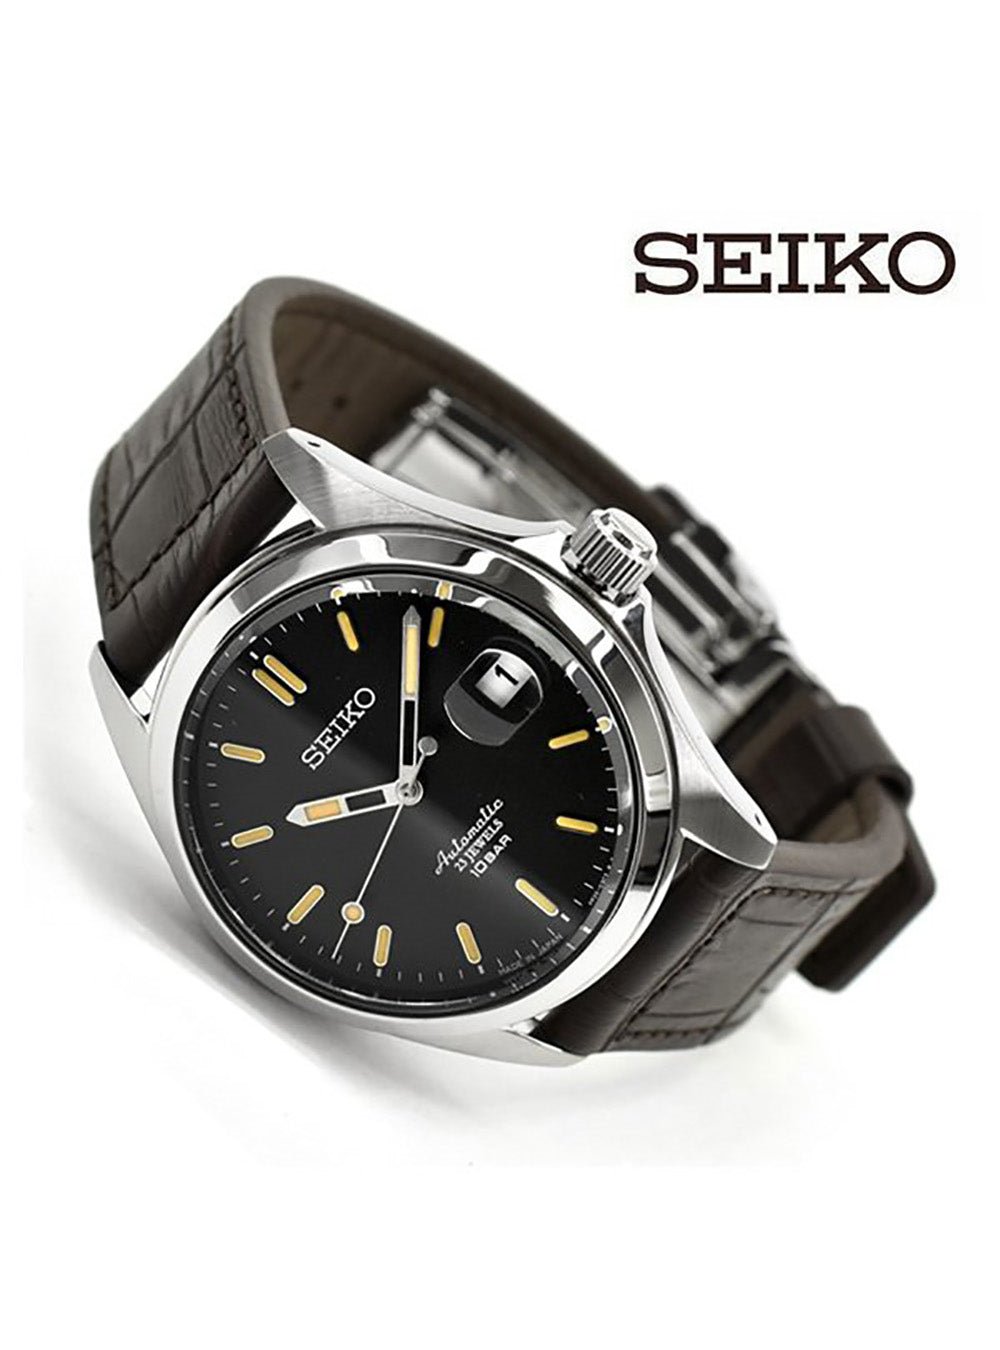 SEIKO AUTOMATIC MECHANICAL CLASSIC LINE SZSB017 SHOP LIMITED MADE IN JAPAN JDMWRISTWATCHjapan-select